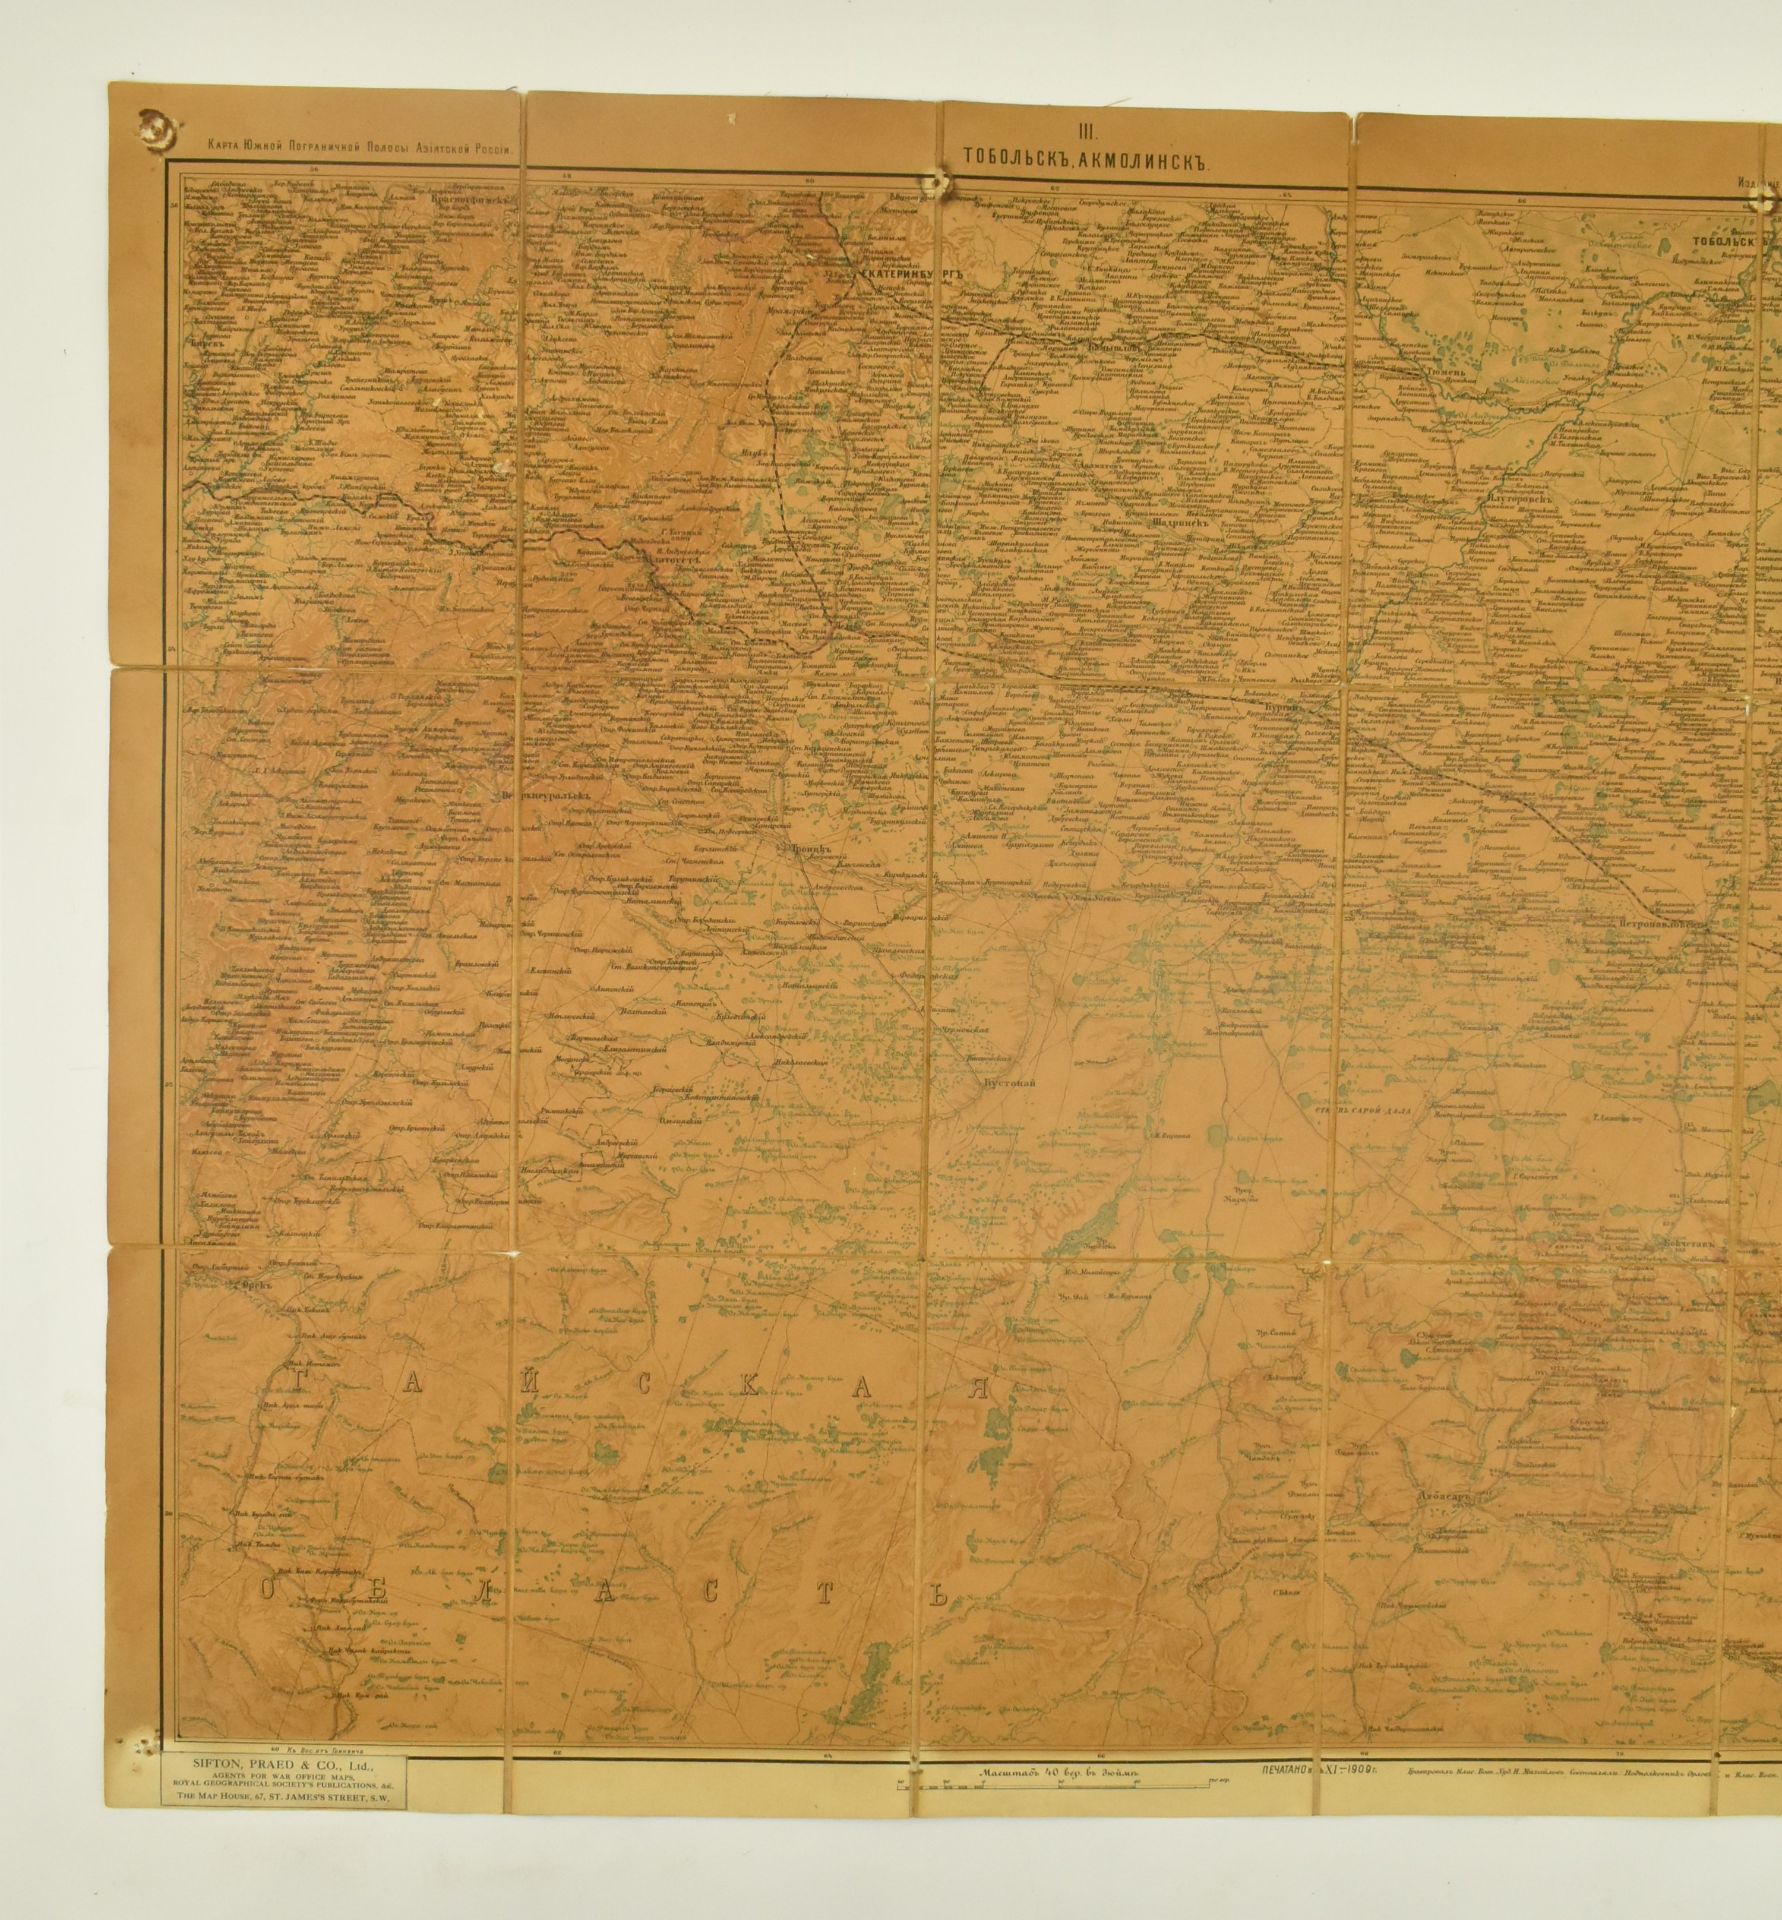 EARLY 20TH CENTURY MAP OF THE TRANS-SIBERIAN RAILWAY - Image 5 of 8